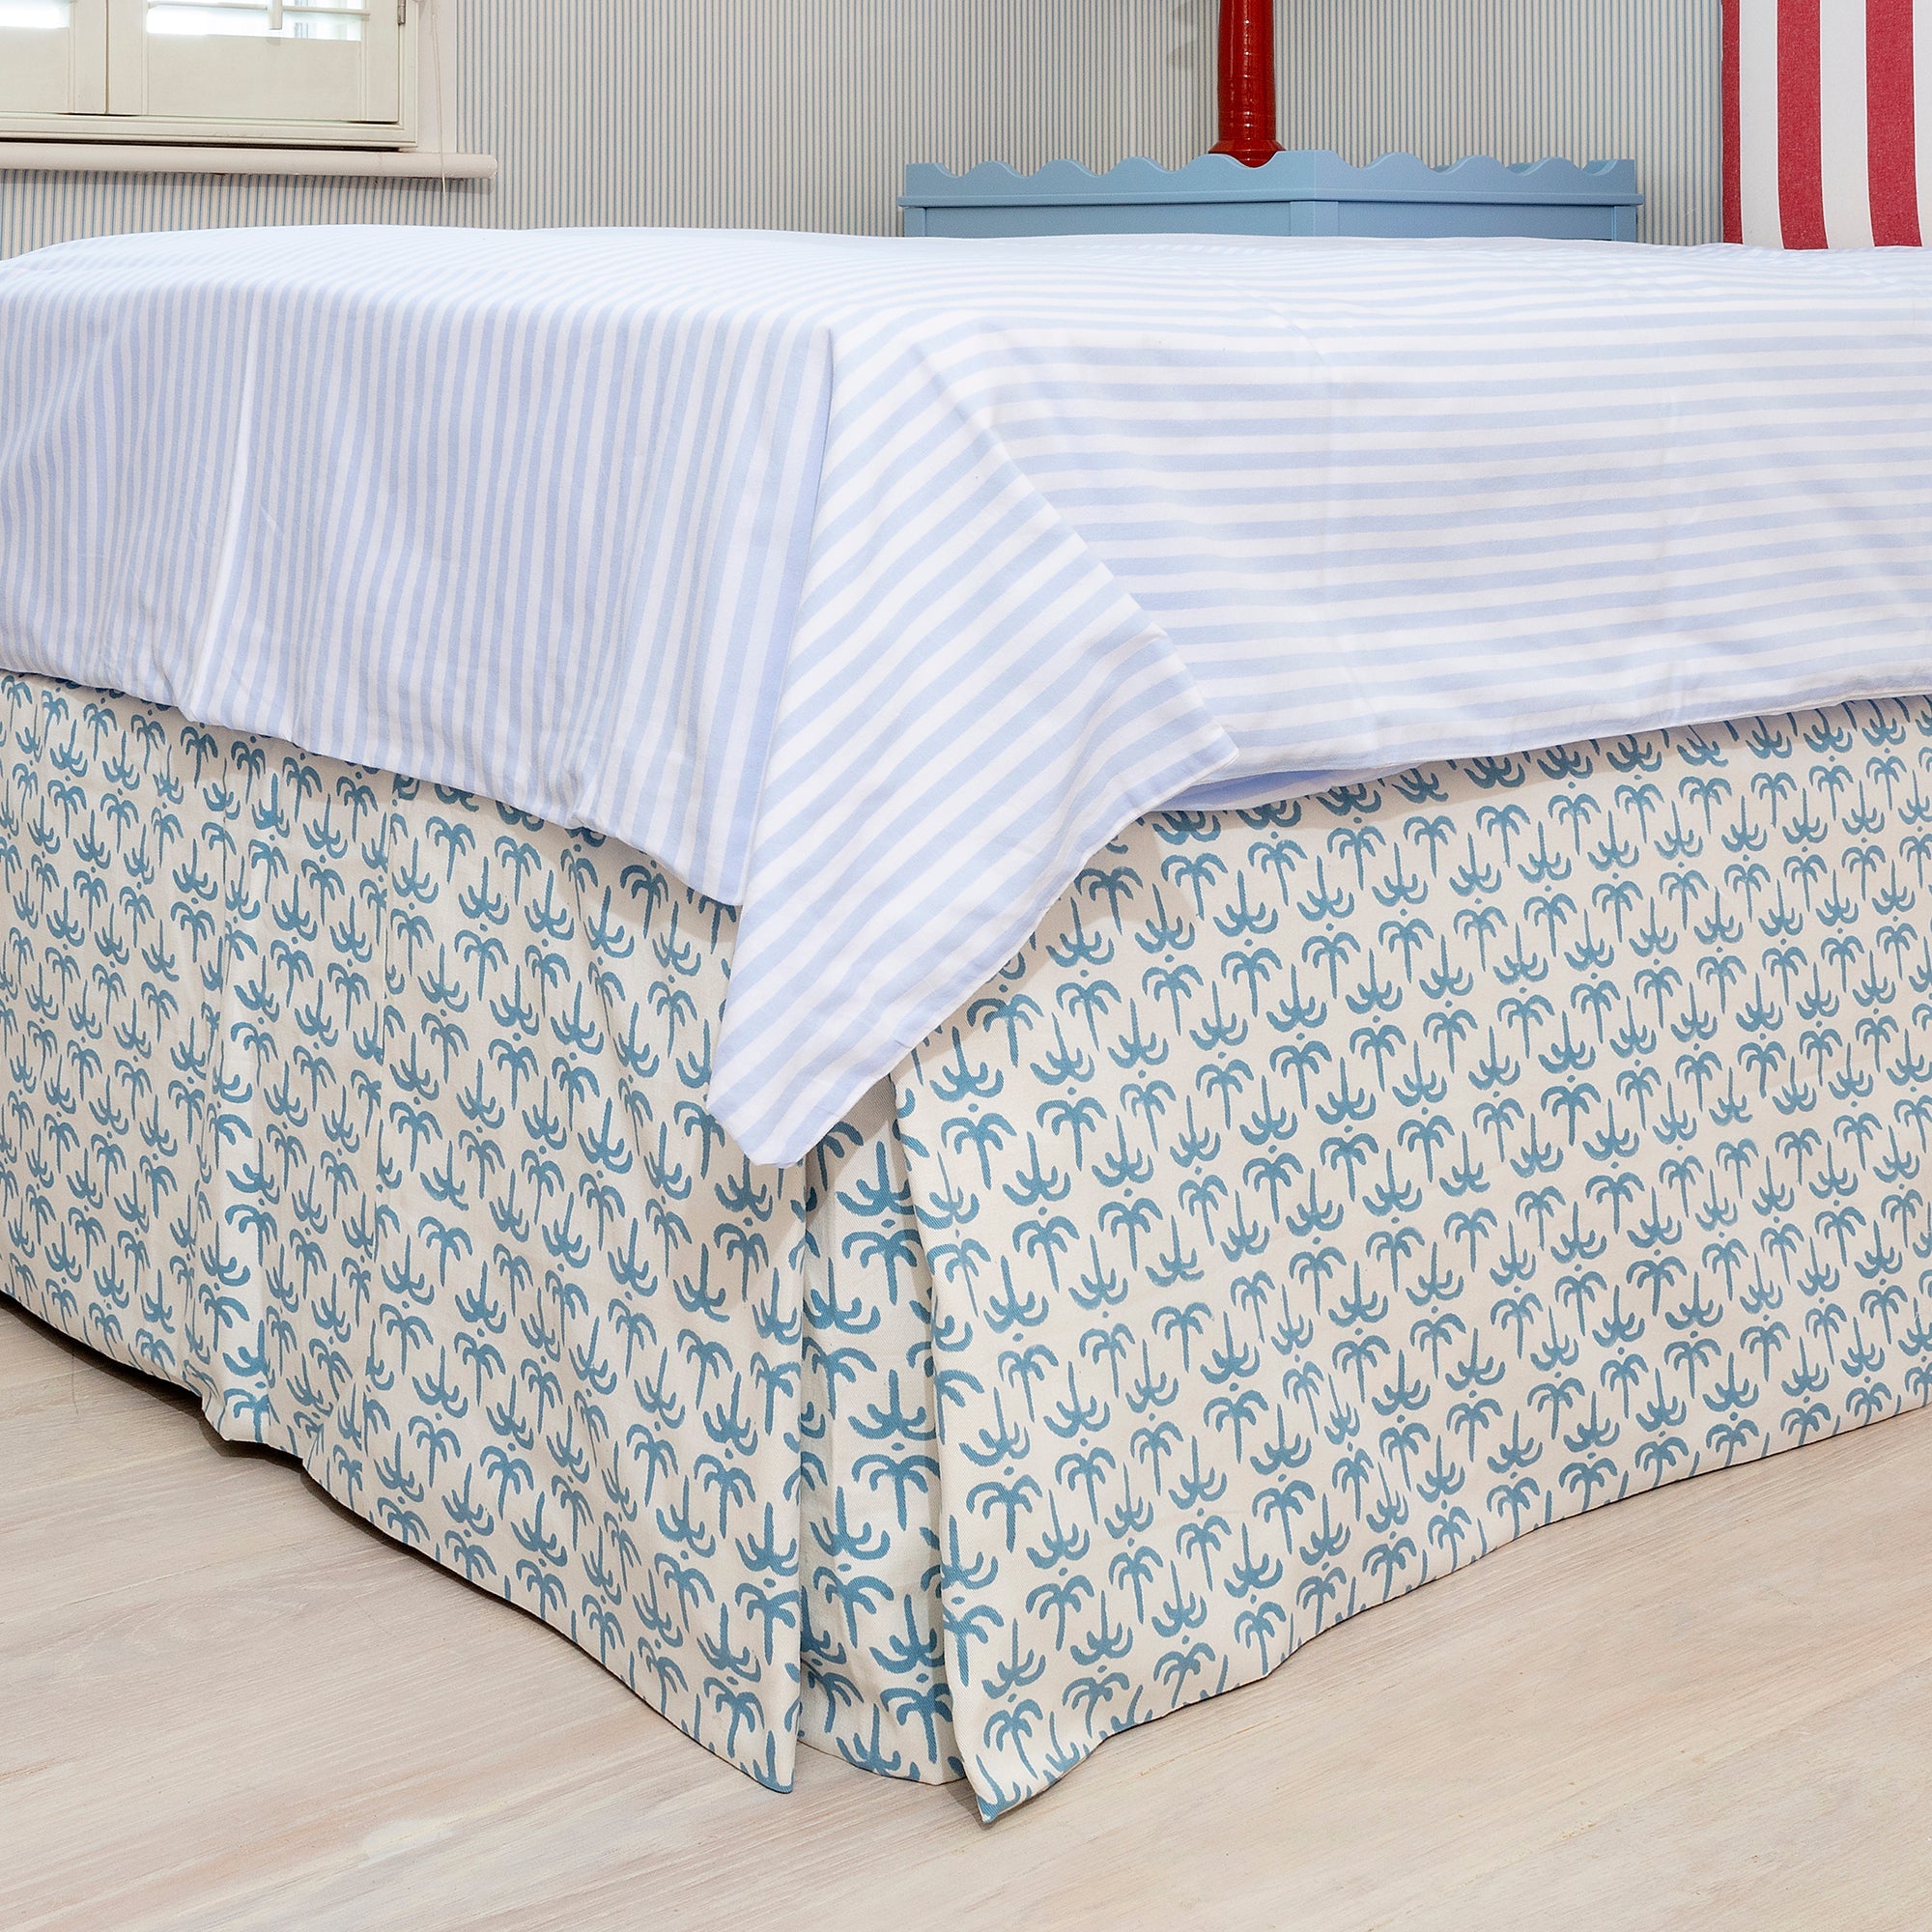 Blue Callaloo Cotton Piped Bed Valance - Alice Palmer & Co